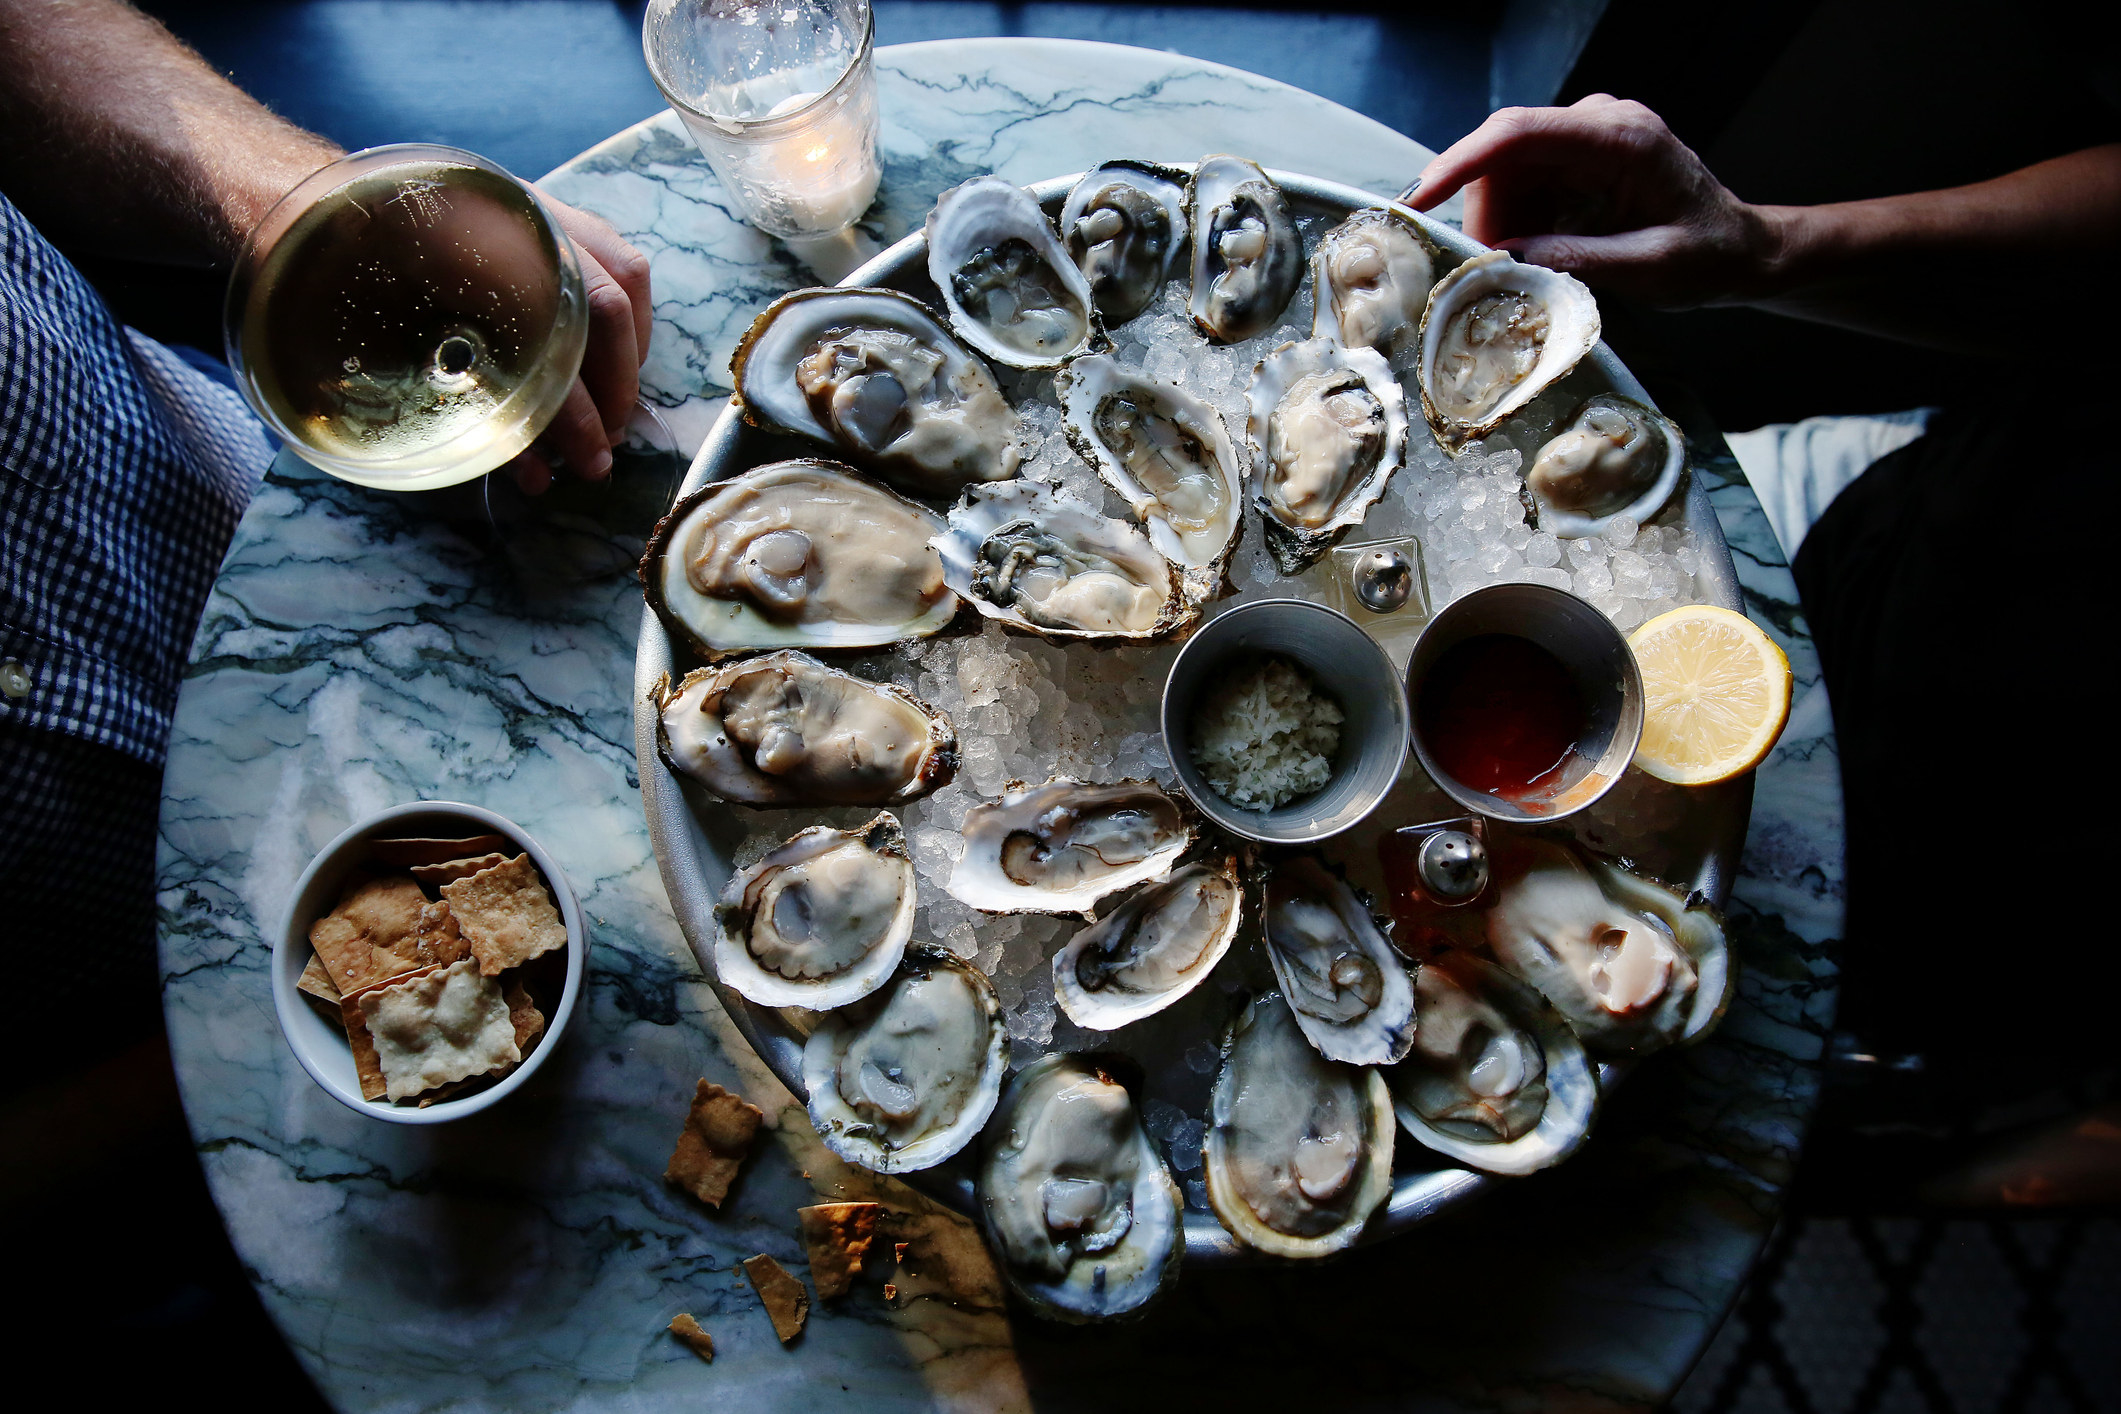 A tray of raw oysters